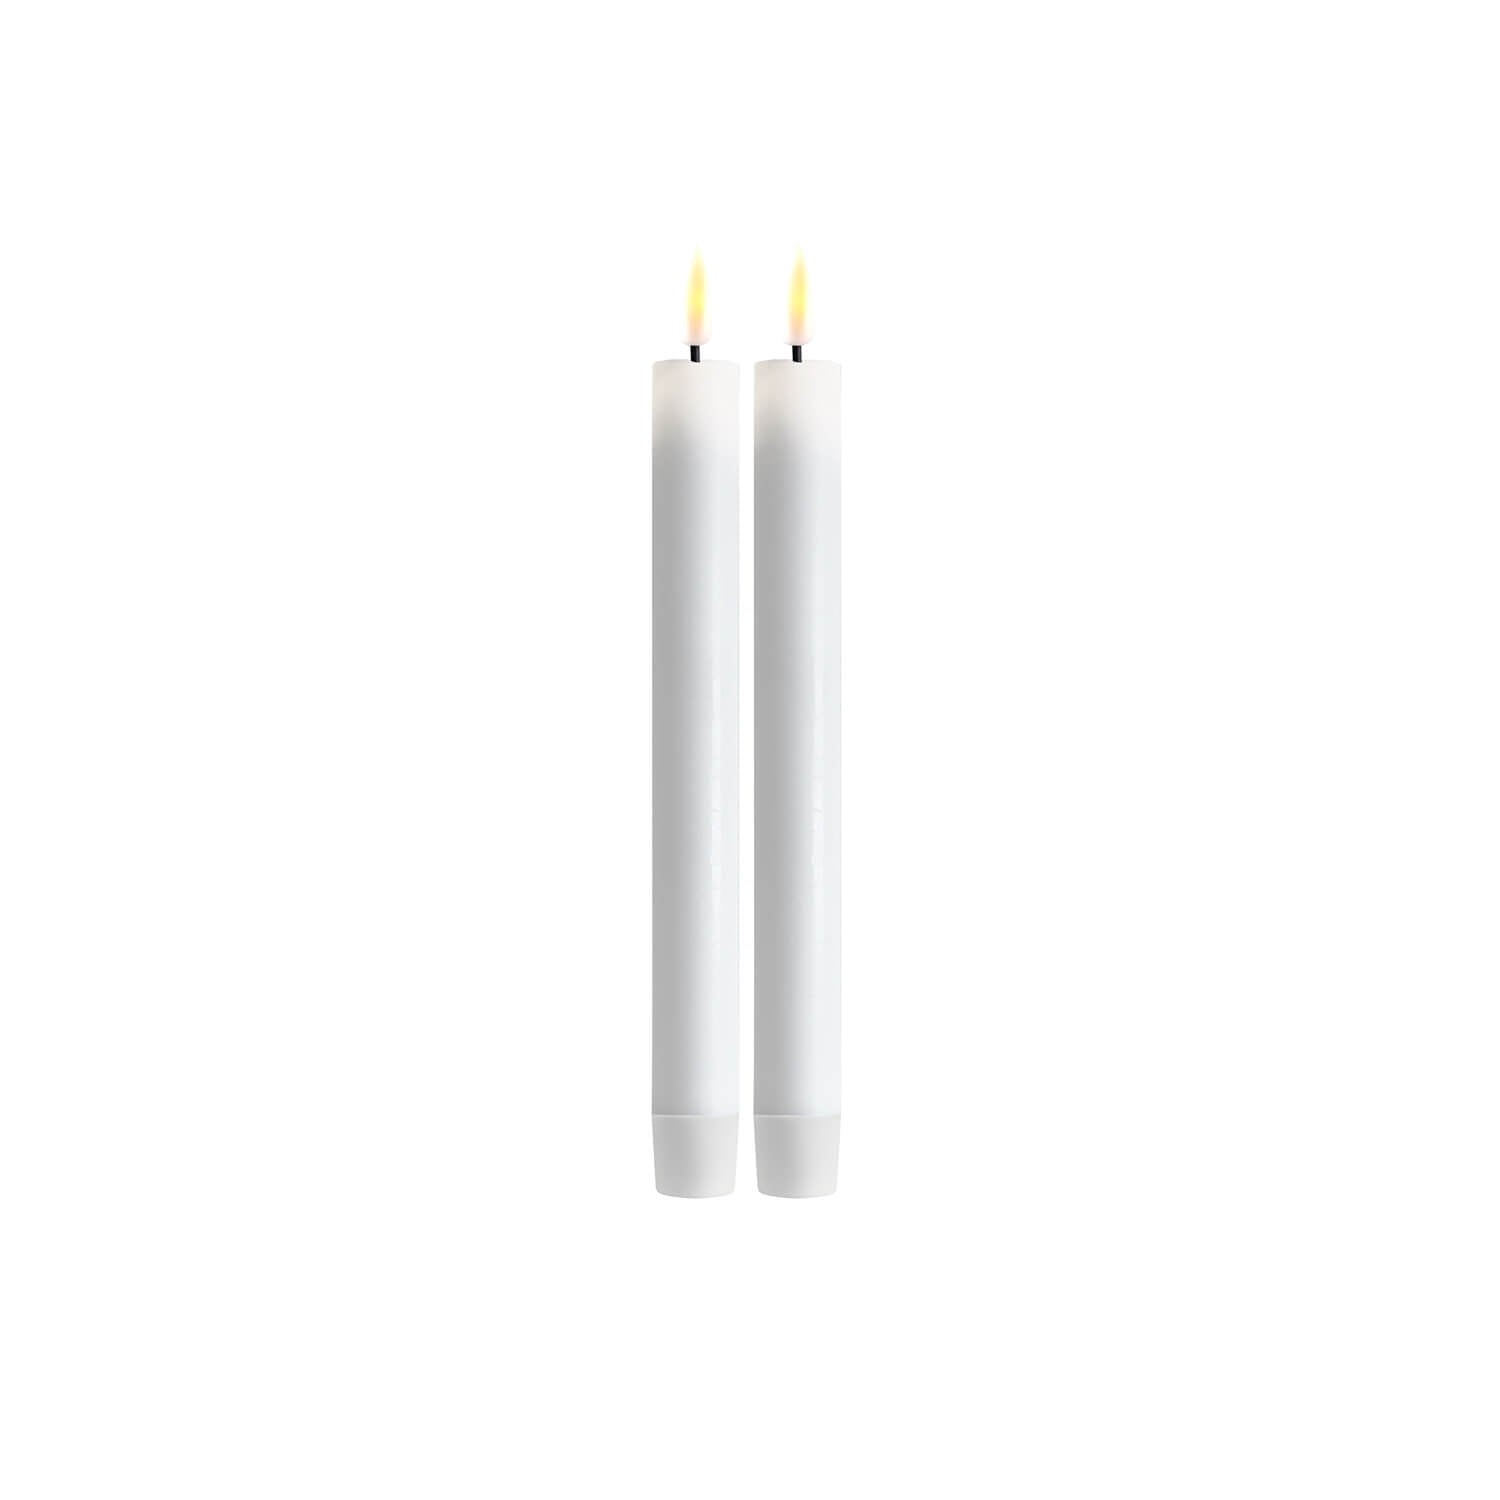 Deluxe Candles Deluxe 2-Piece LED Dinner Candle 2.2cm x 24cm - White 1 Shaws Department Stores